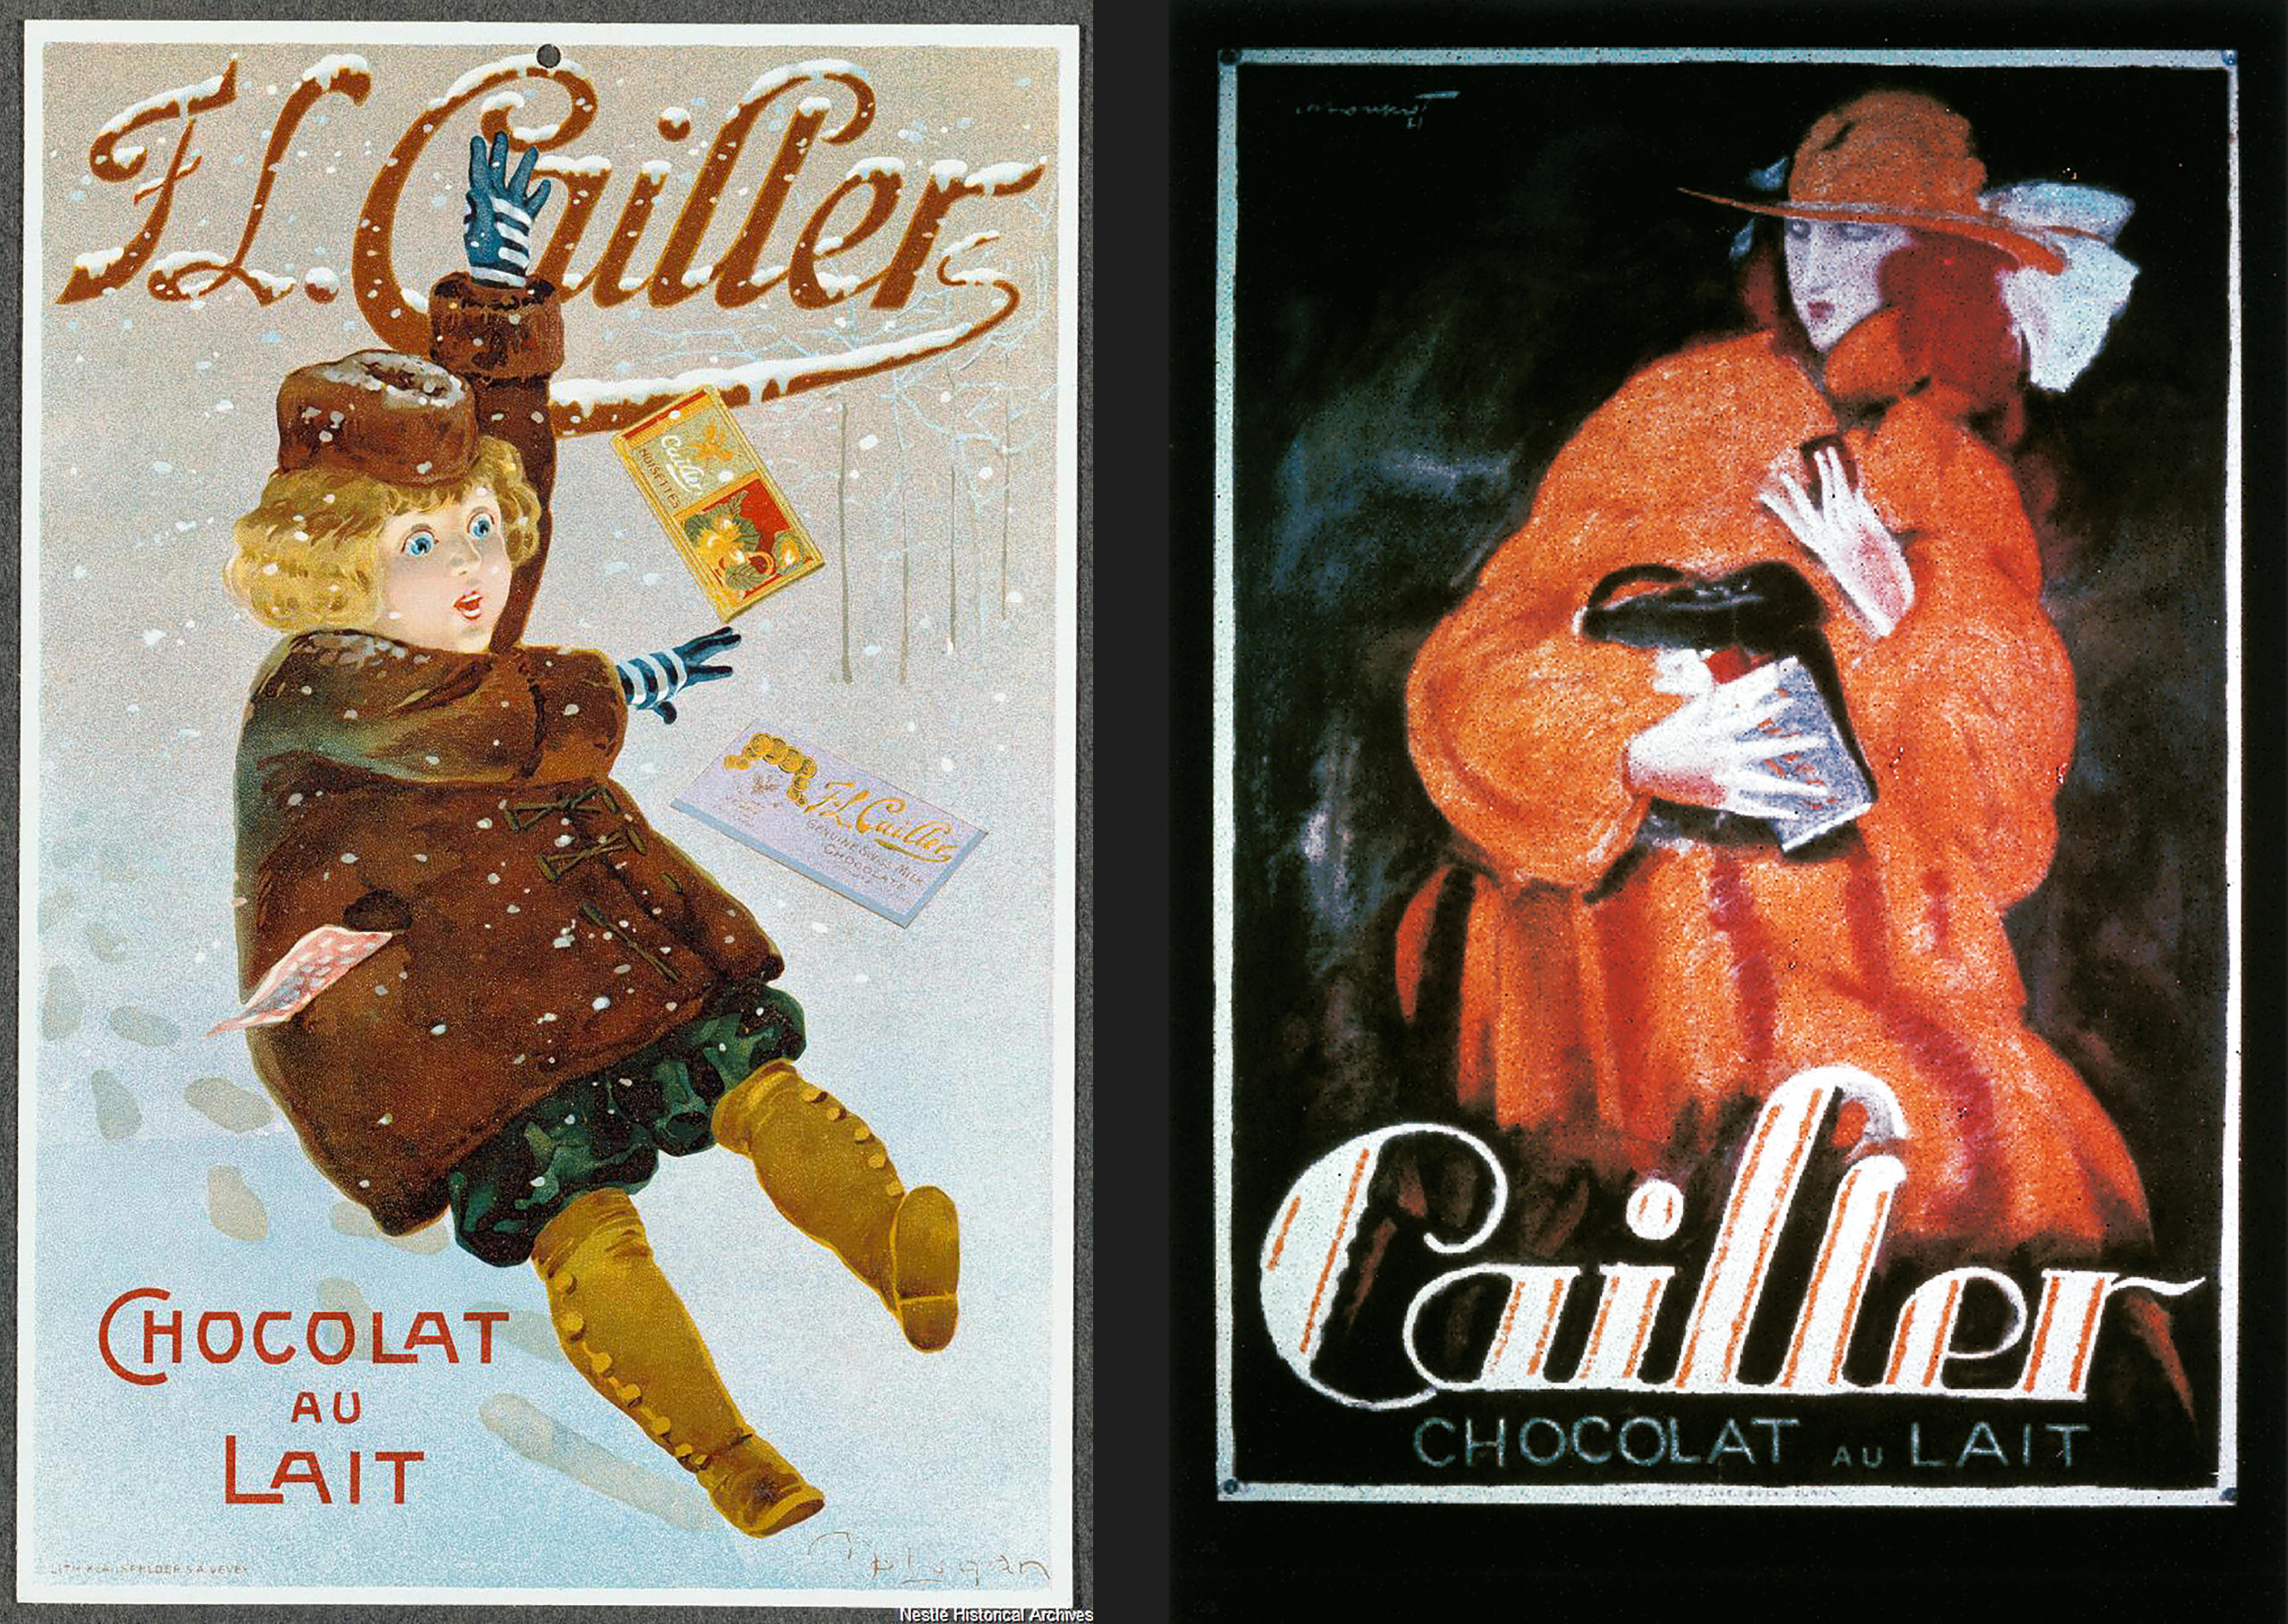 2 posters advertising Cailler chocolate